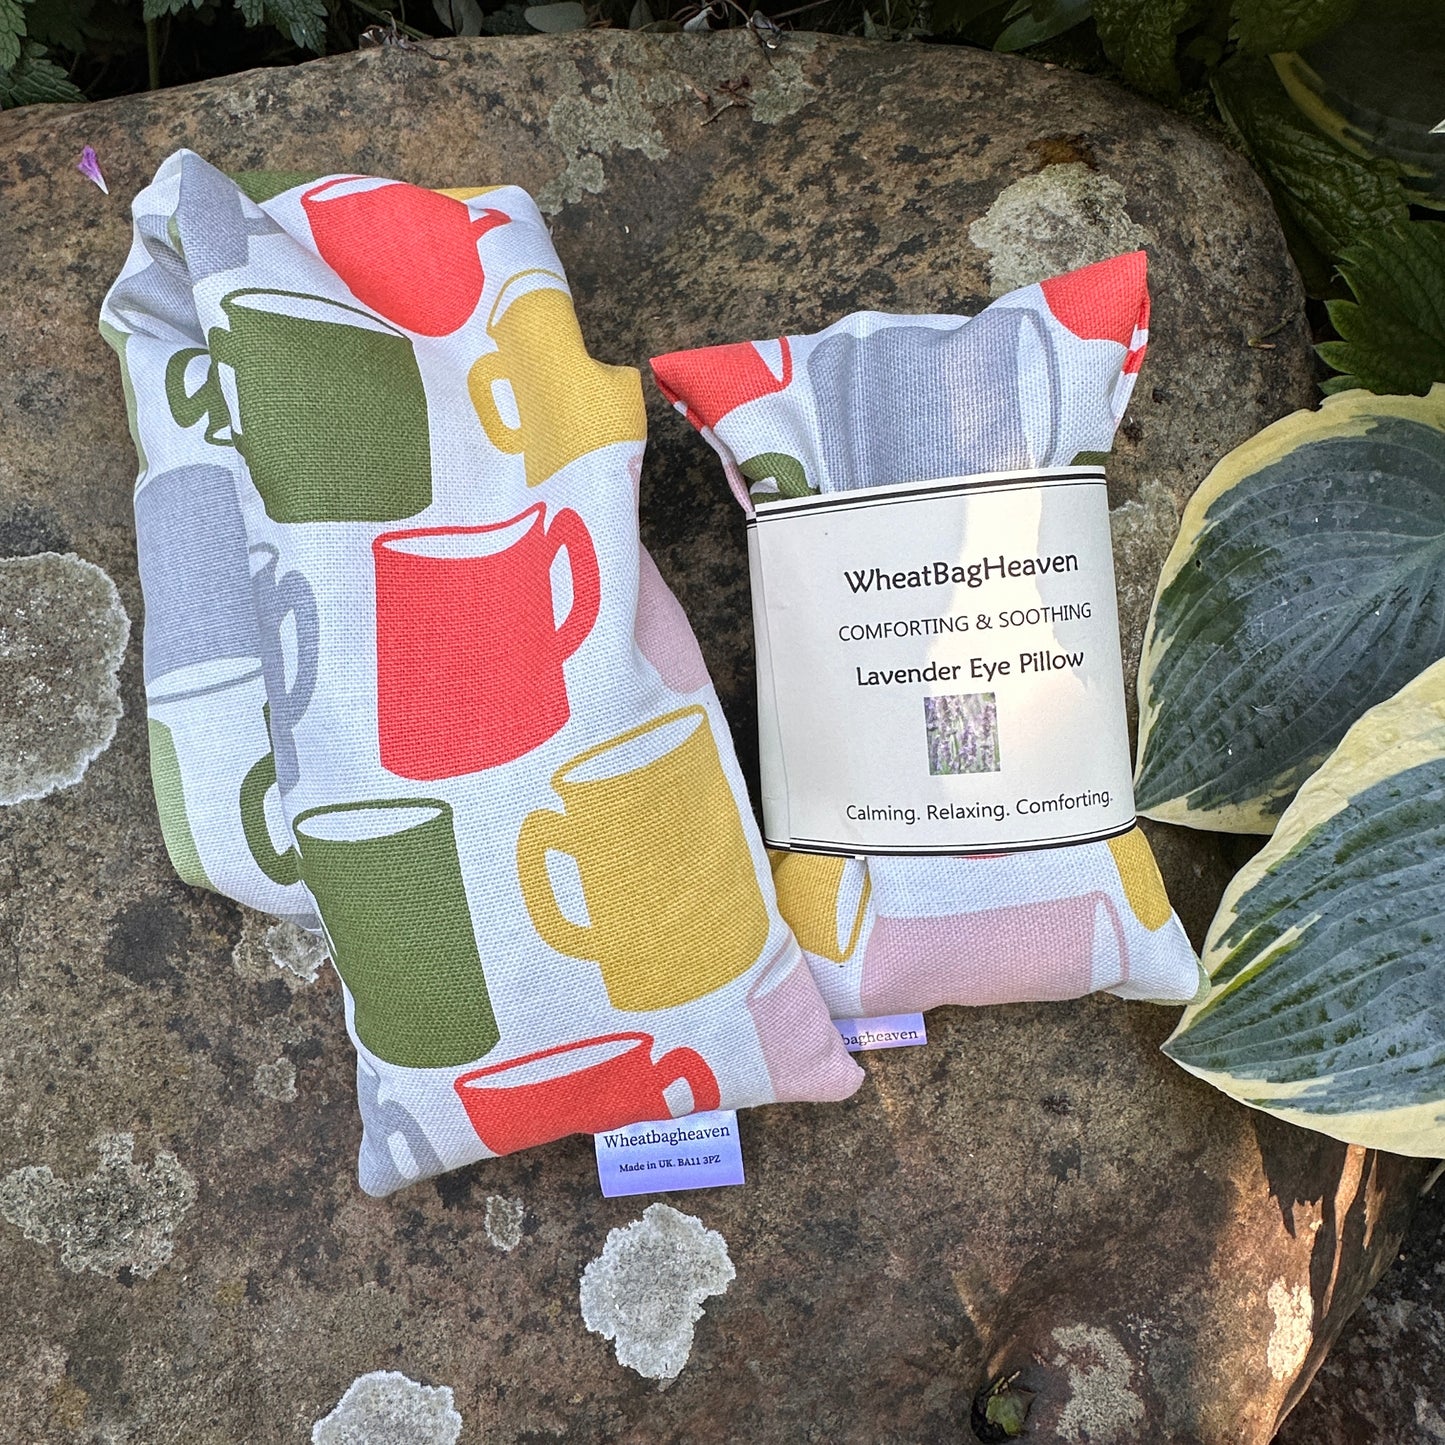 Tea/coffee lover wheat bag lavender scented neck wrap. Practical & reheat-able natural pain relief wheat bag